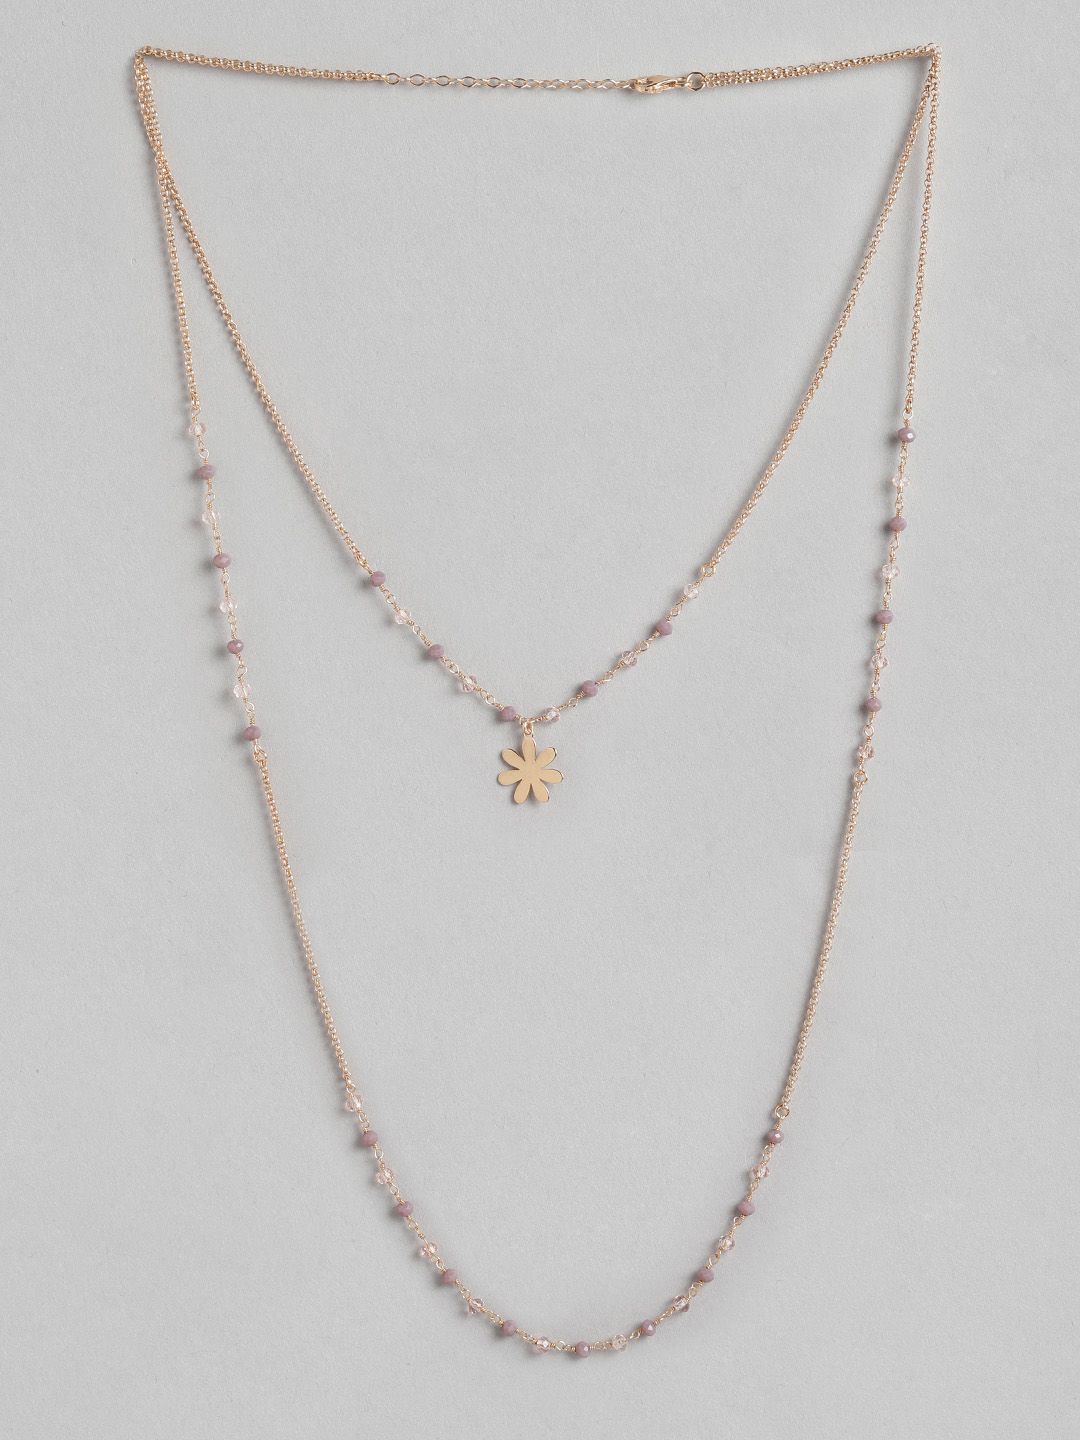 Carlton London Rose Gold-Plated & Purple Brass Layered Necklace Price in India